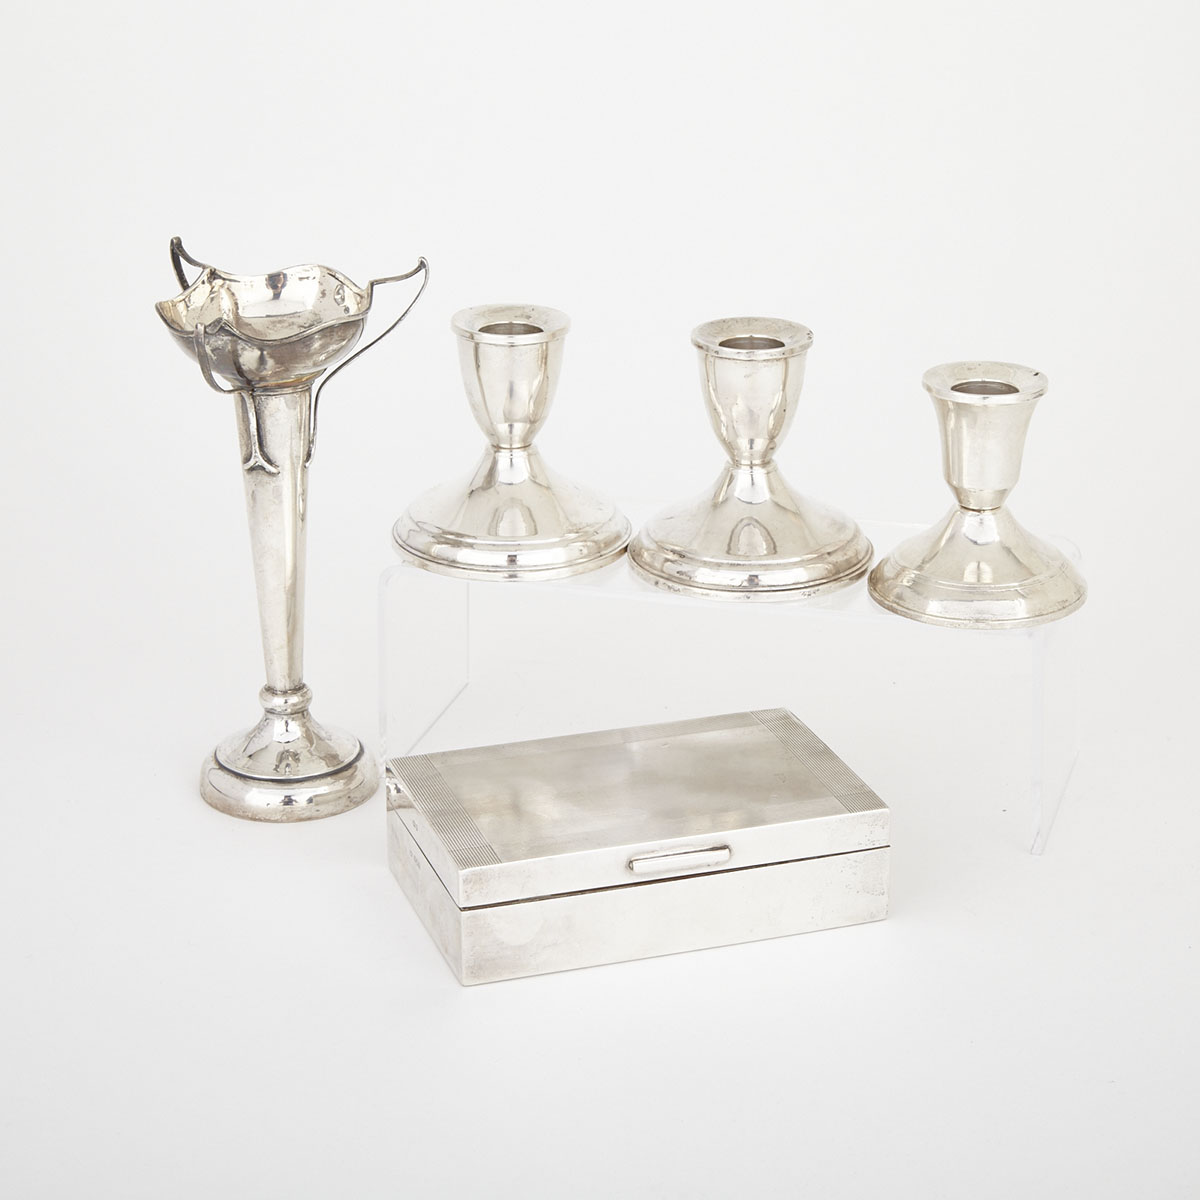 English Silver Cigarette Box, London, 1949, American Silver Bud Vase and Three Low Candlesticks, 20th century